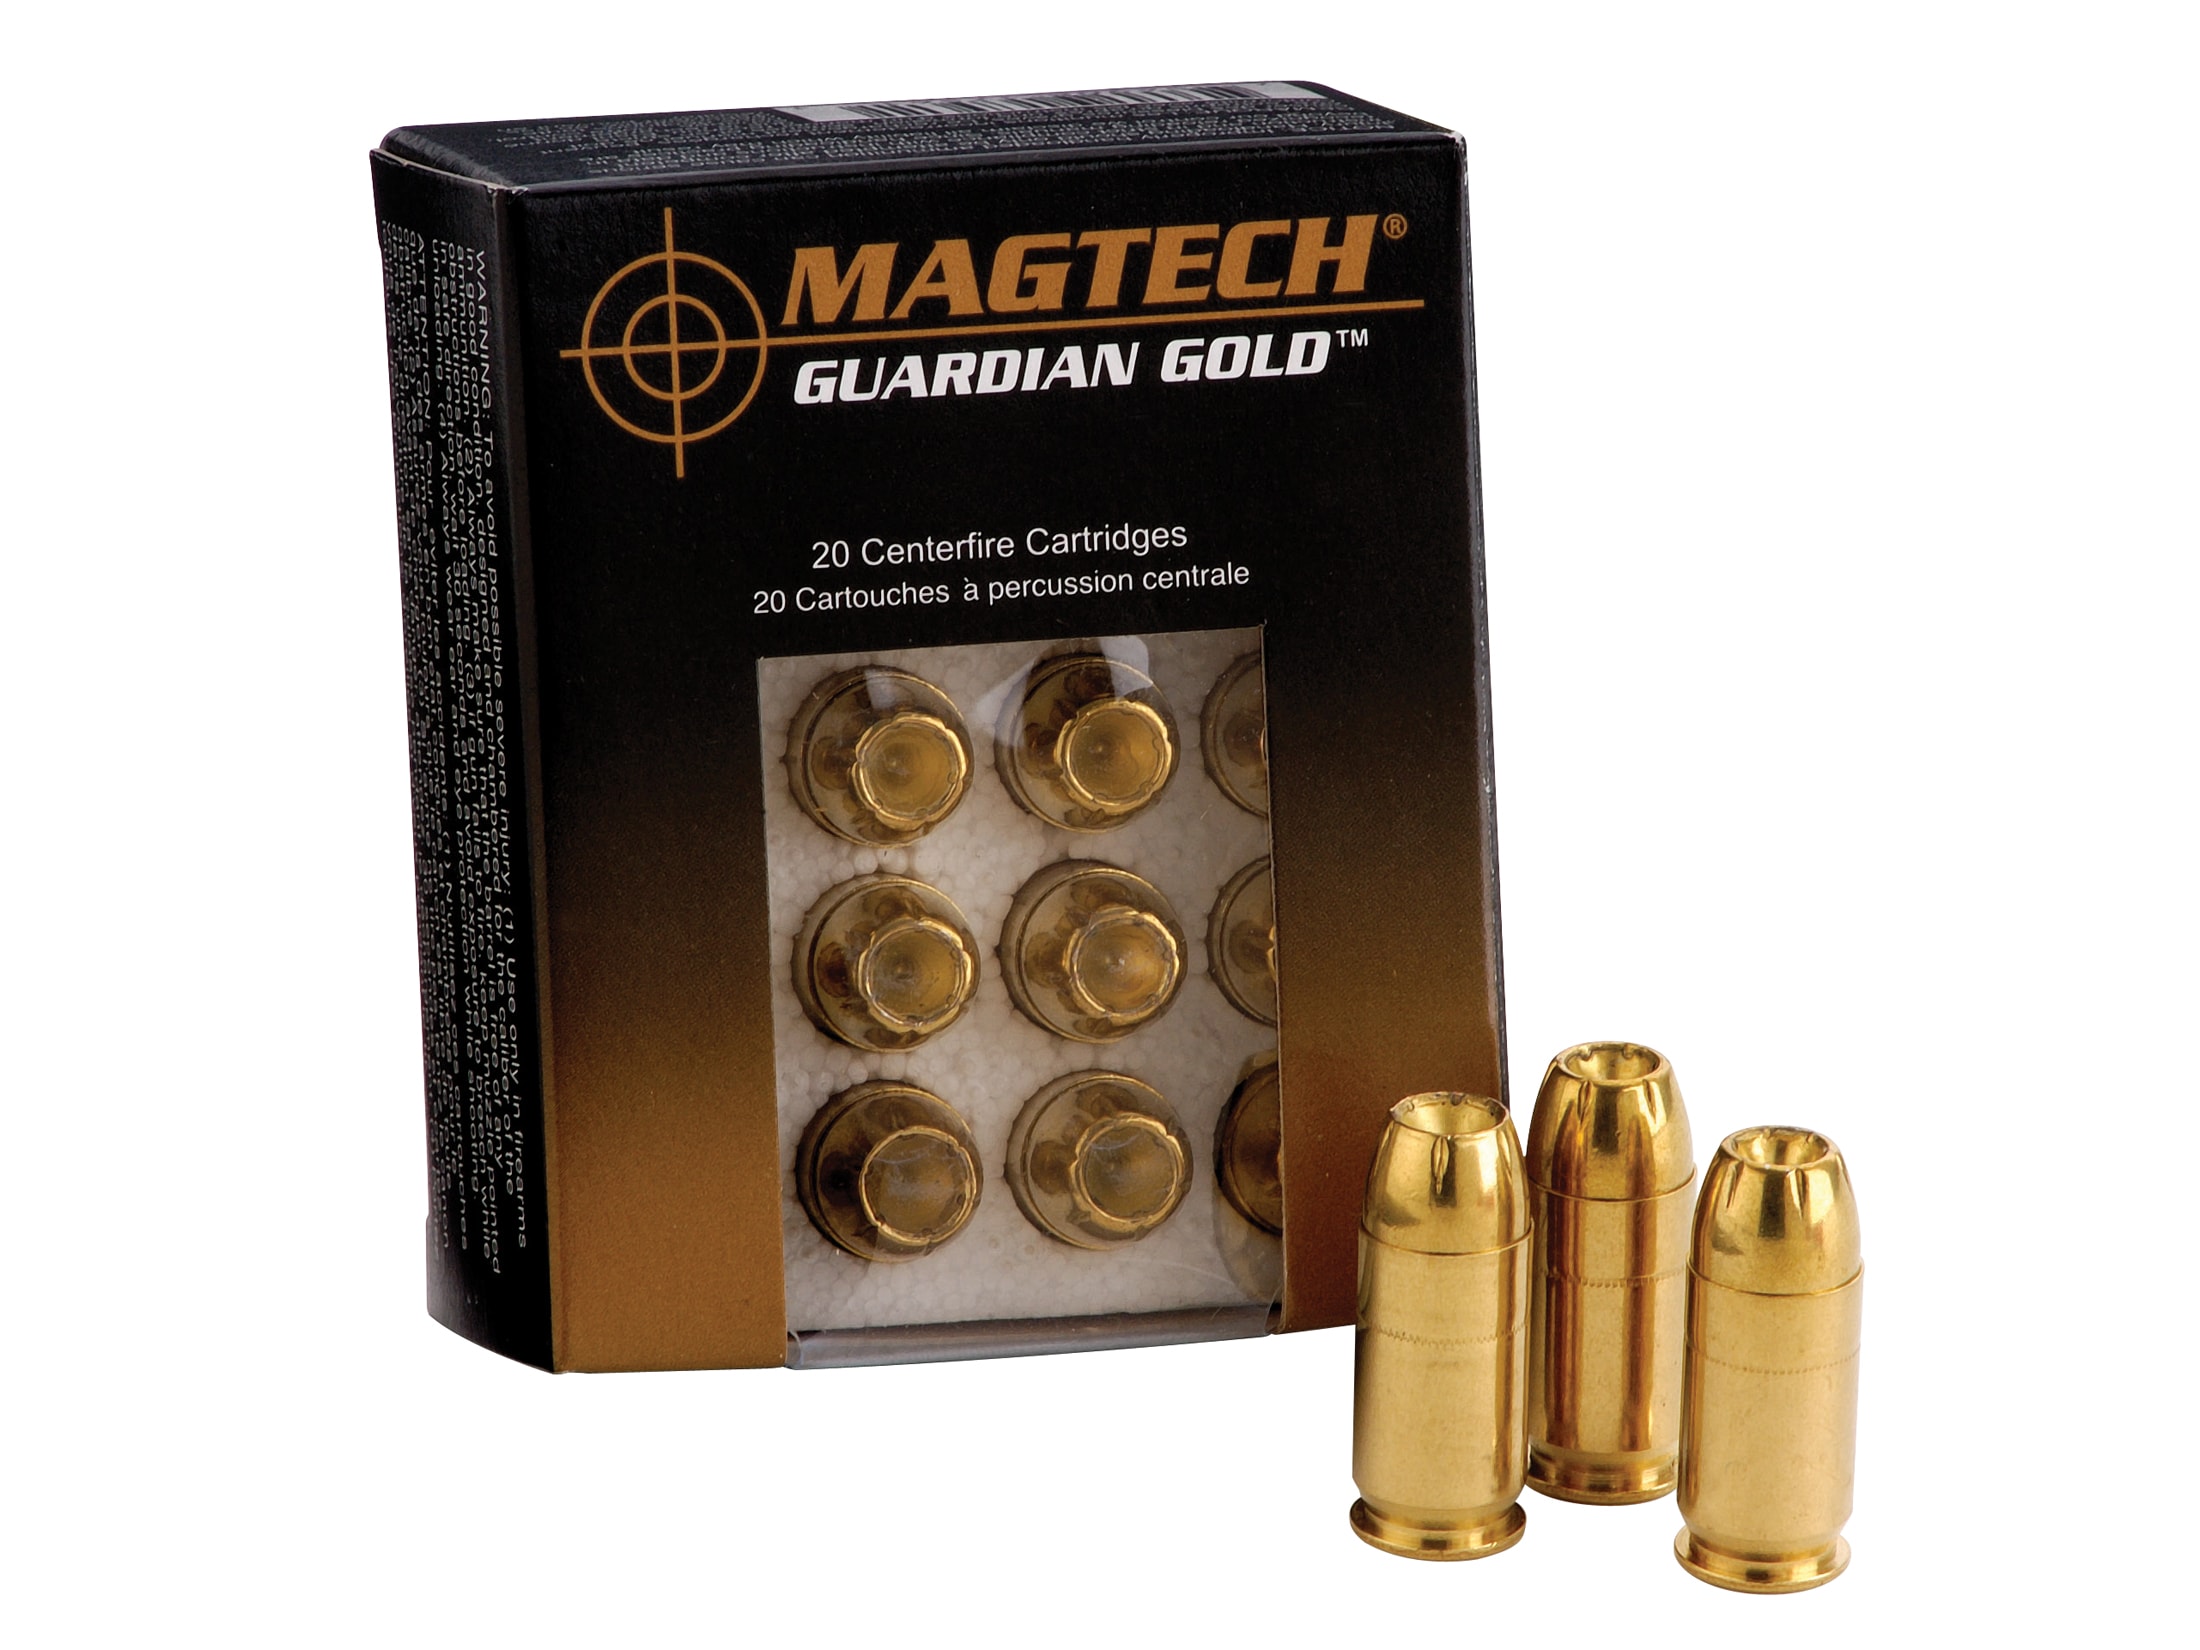 Magtech Guardian Gold Ammo 9mm Luger 124 Grain Jacketed Hollow Point.